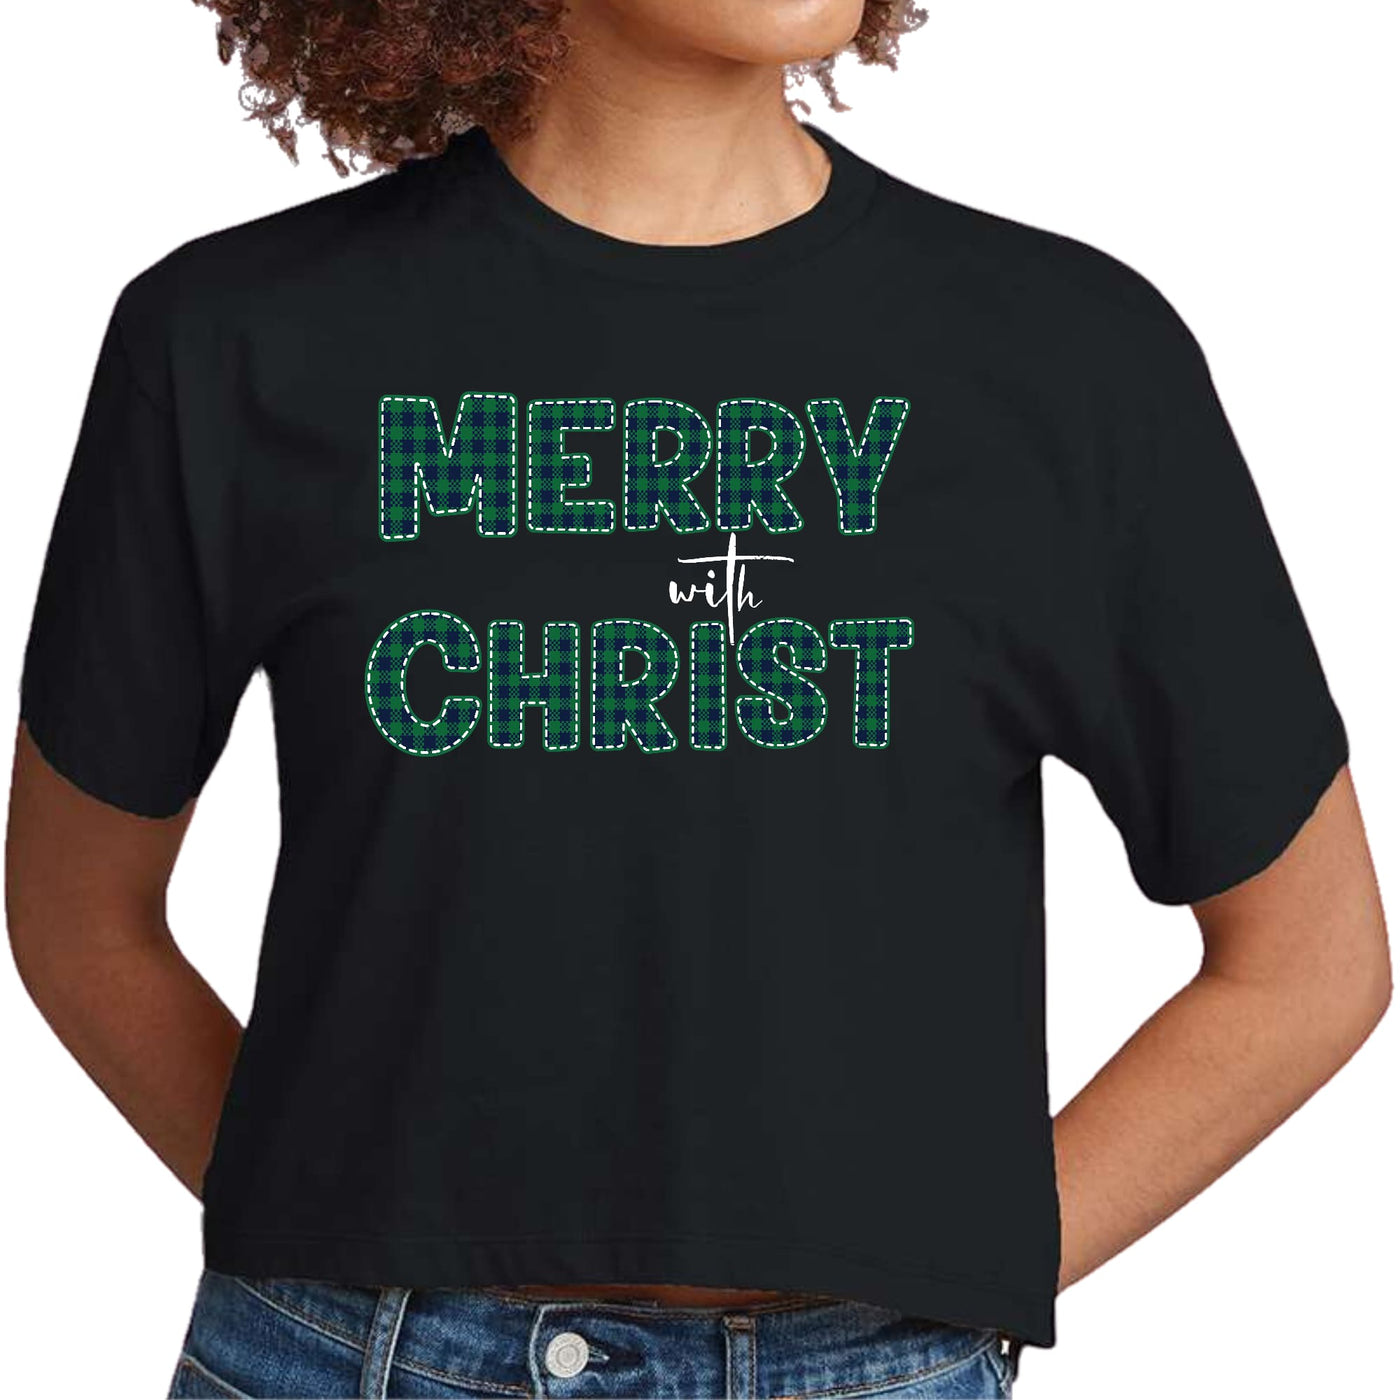 Womens Cropped Graphic T-shirt Merry With Christ Green Plaid - Womens